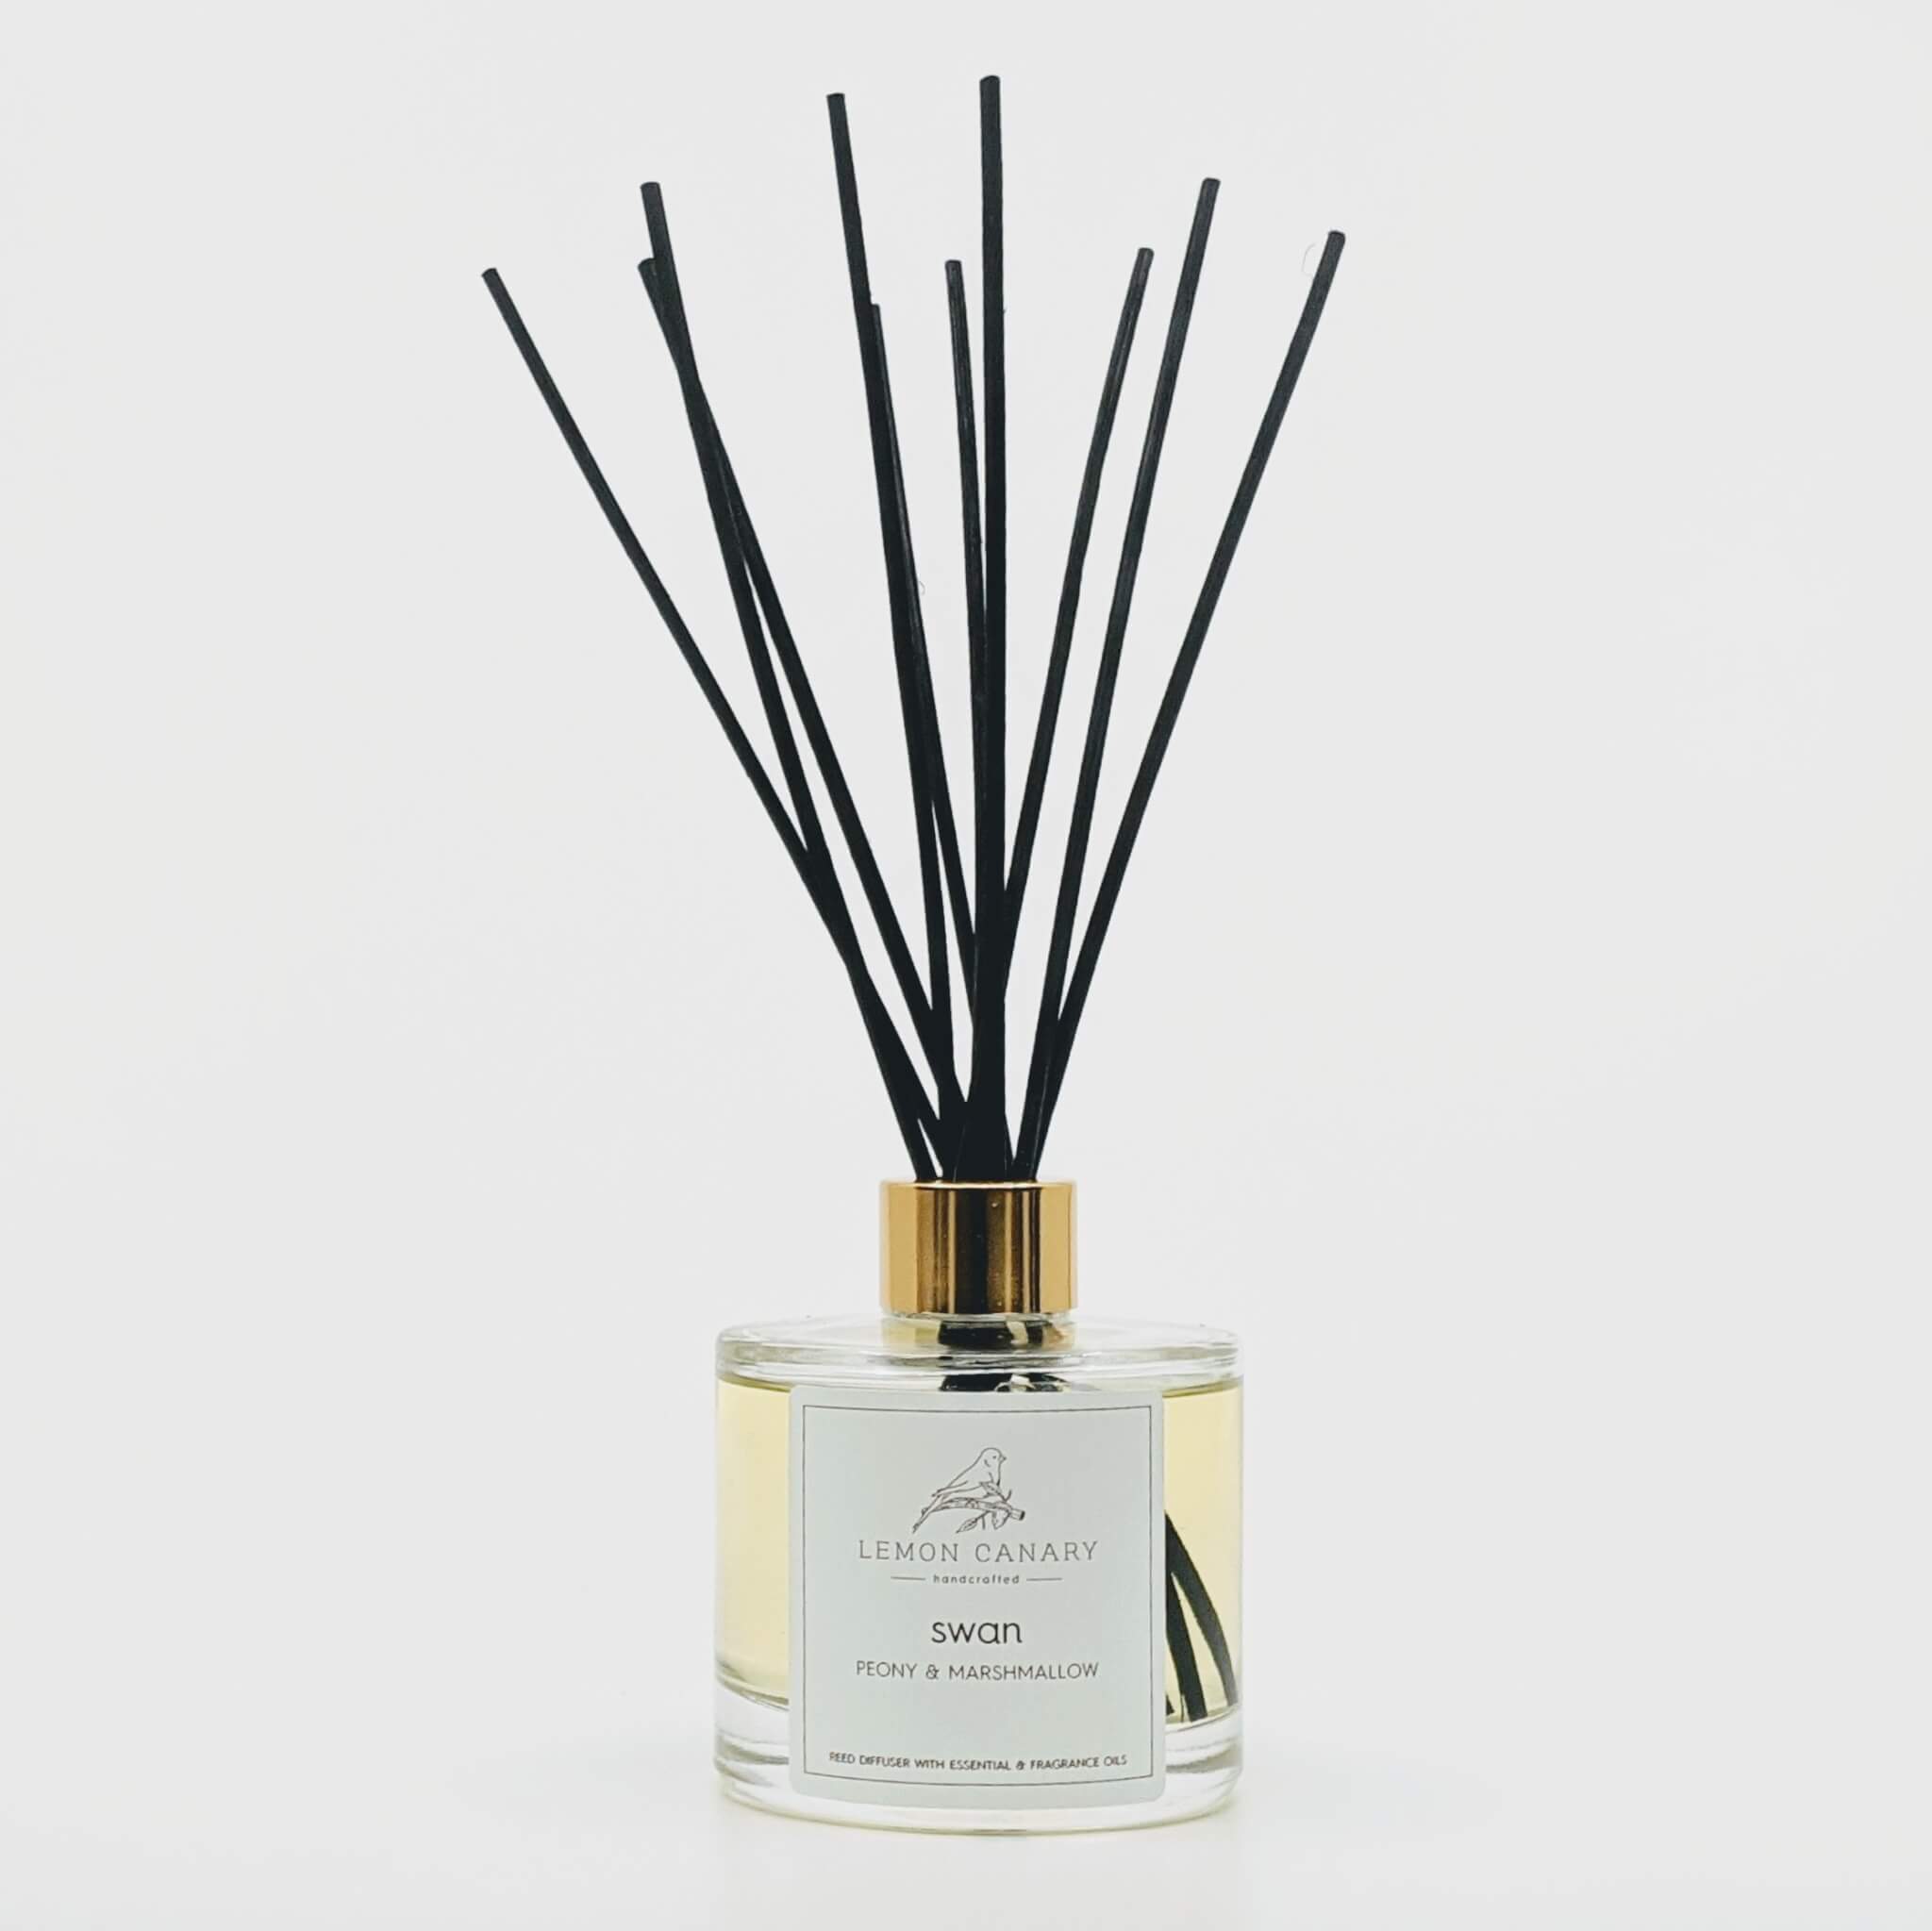 Lemon Canary Reed Diffuser Swan Bottle With Gold Lid Black Reeds 